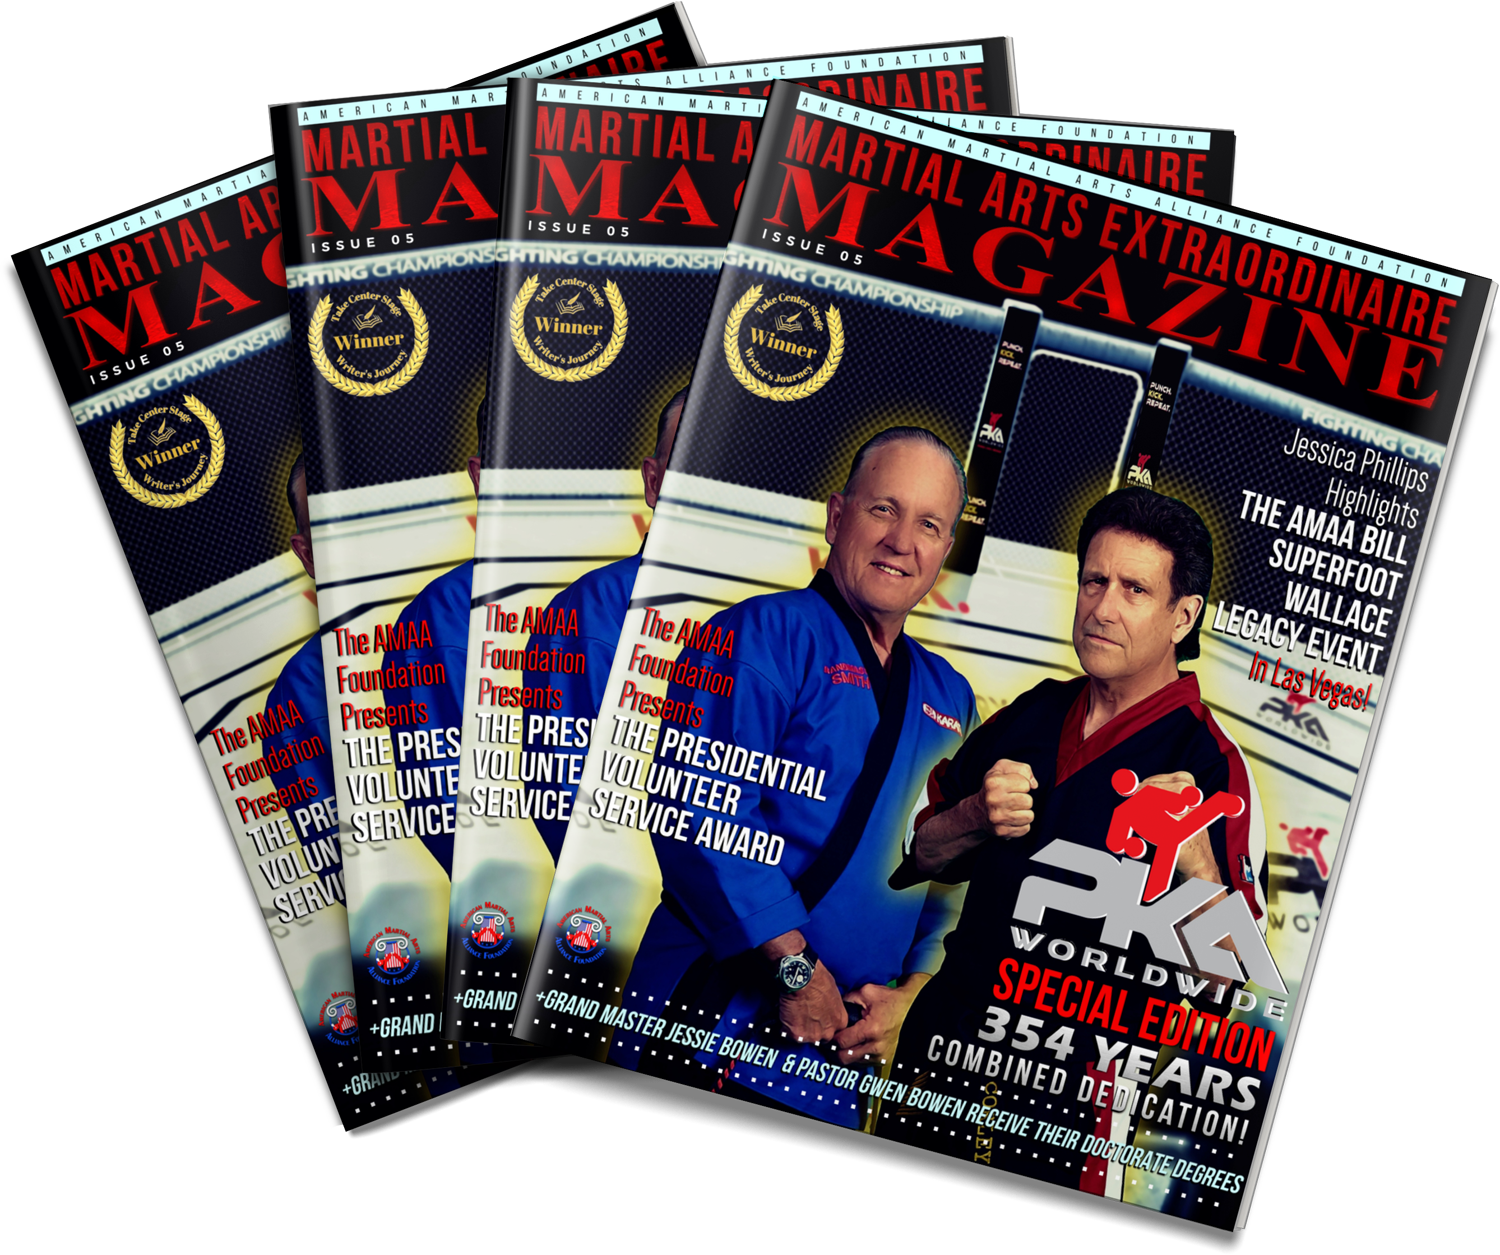 The Martial Arts Extraordinaire Magazine, Issue #05, Printed subscription.